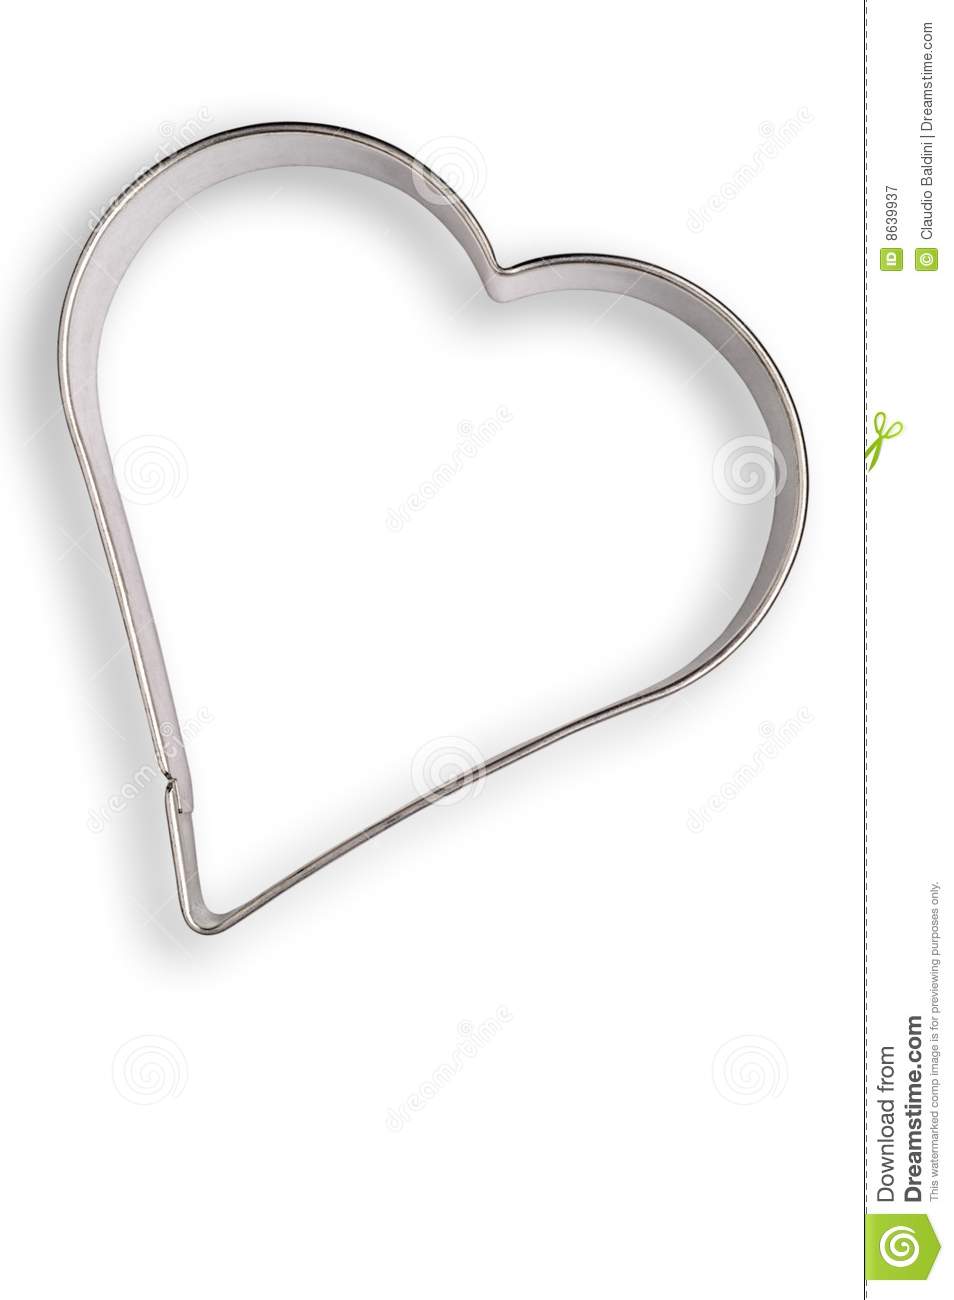 Heart Shaped Cookie Cutter Royalty Free Stock Photography   Image